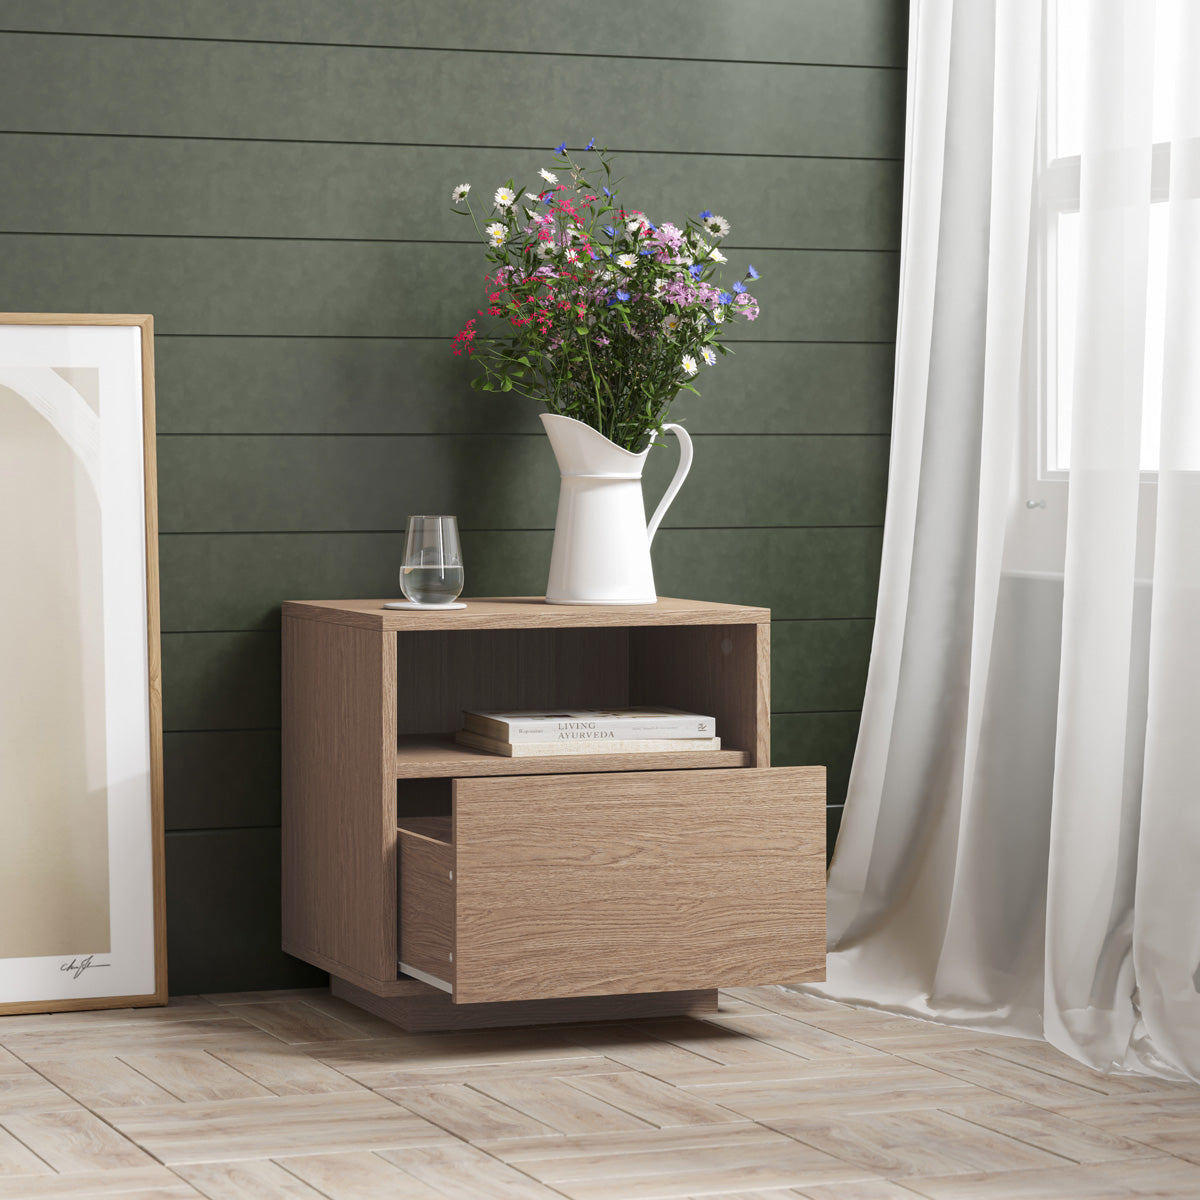 Bedside Table With Storage Drawer (Urban, Oak Colour)